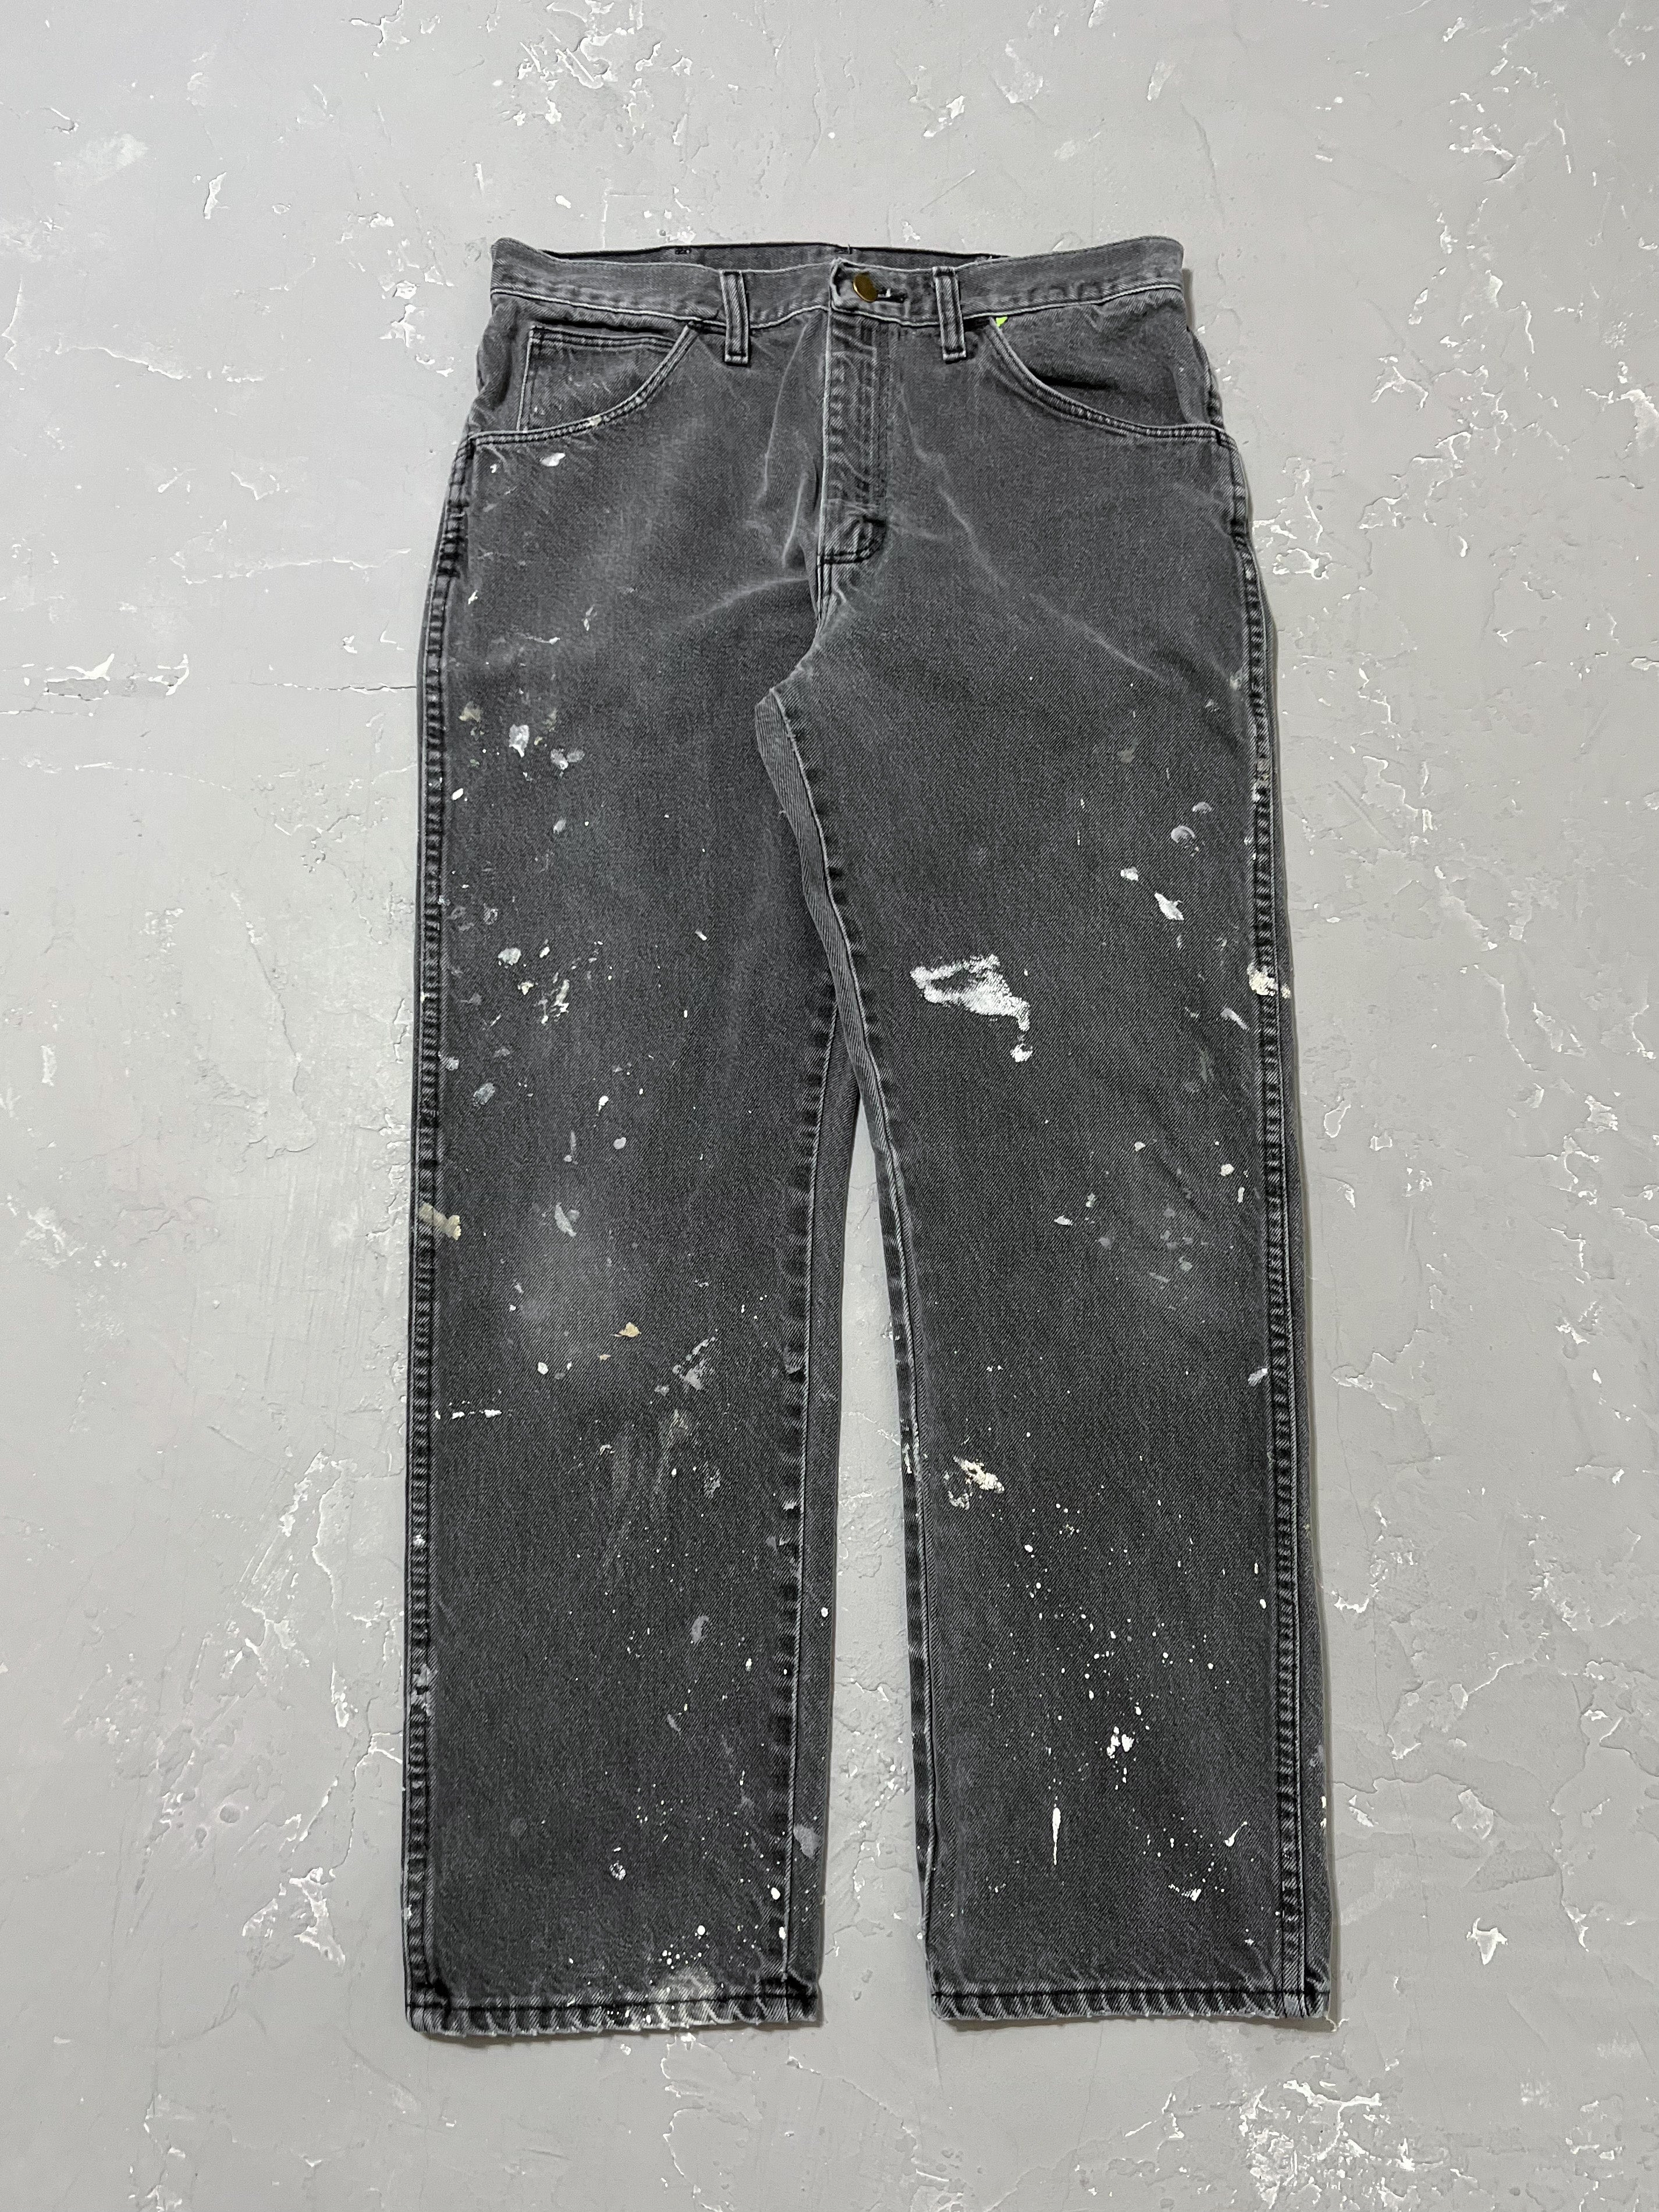 1990s Wrangler Faded Black Painted Jeans [32 x 30]